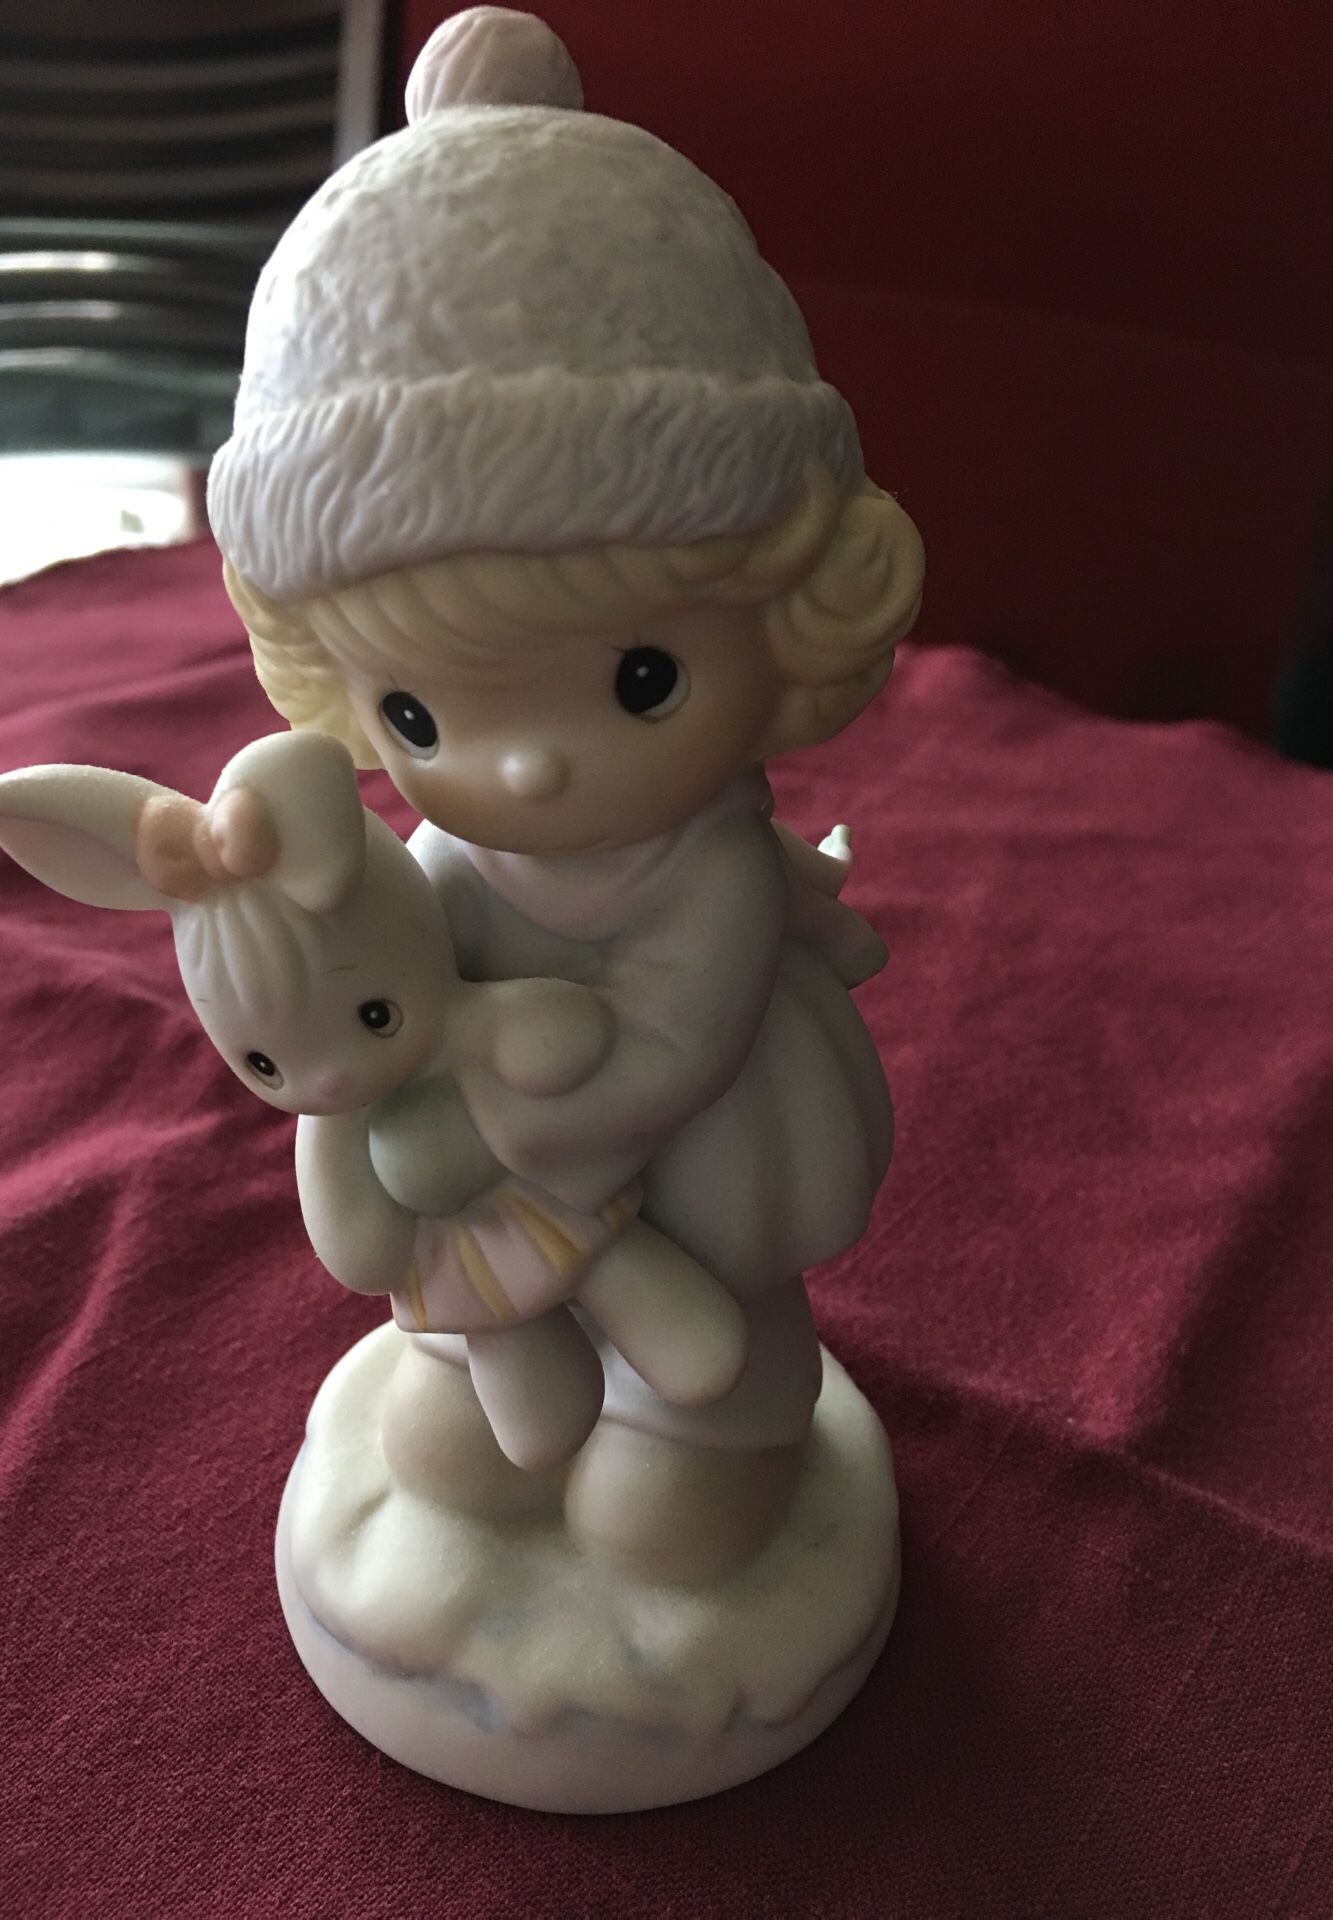 1991 “Good Friends are for Always” collectible